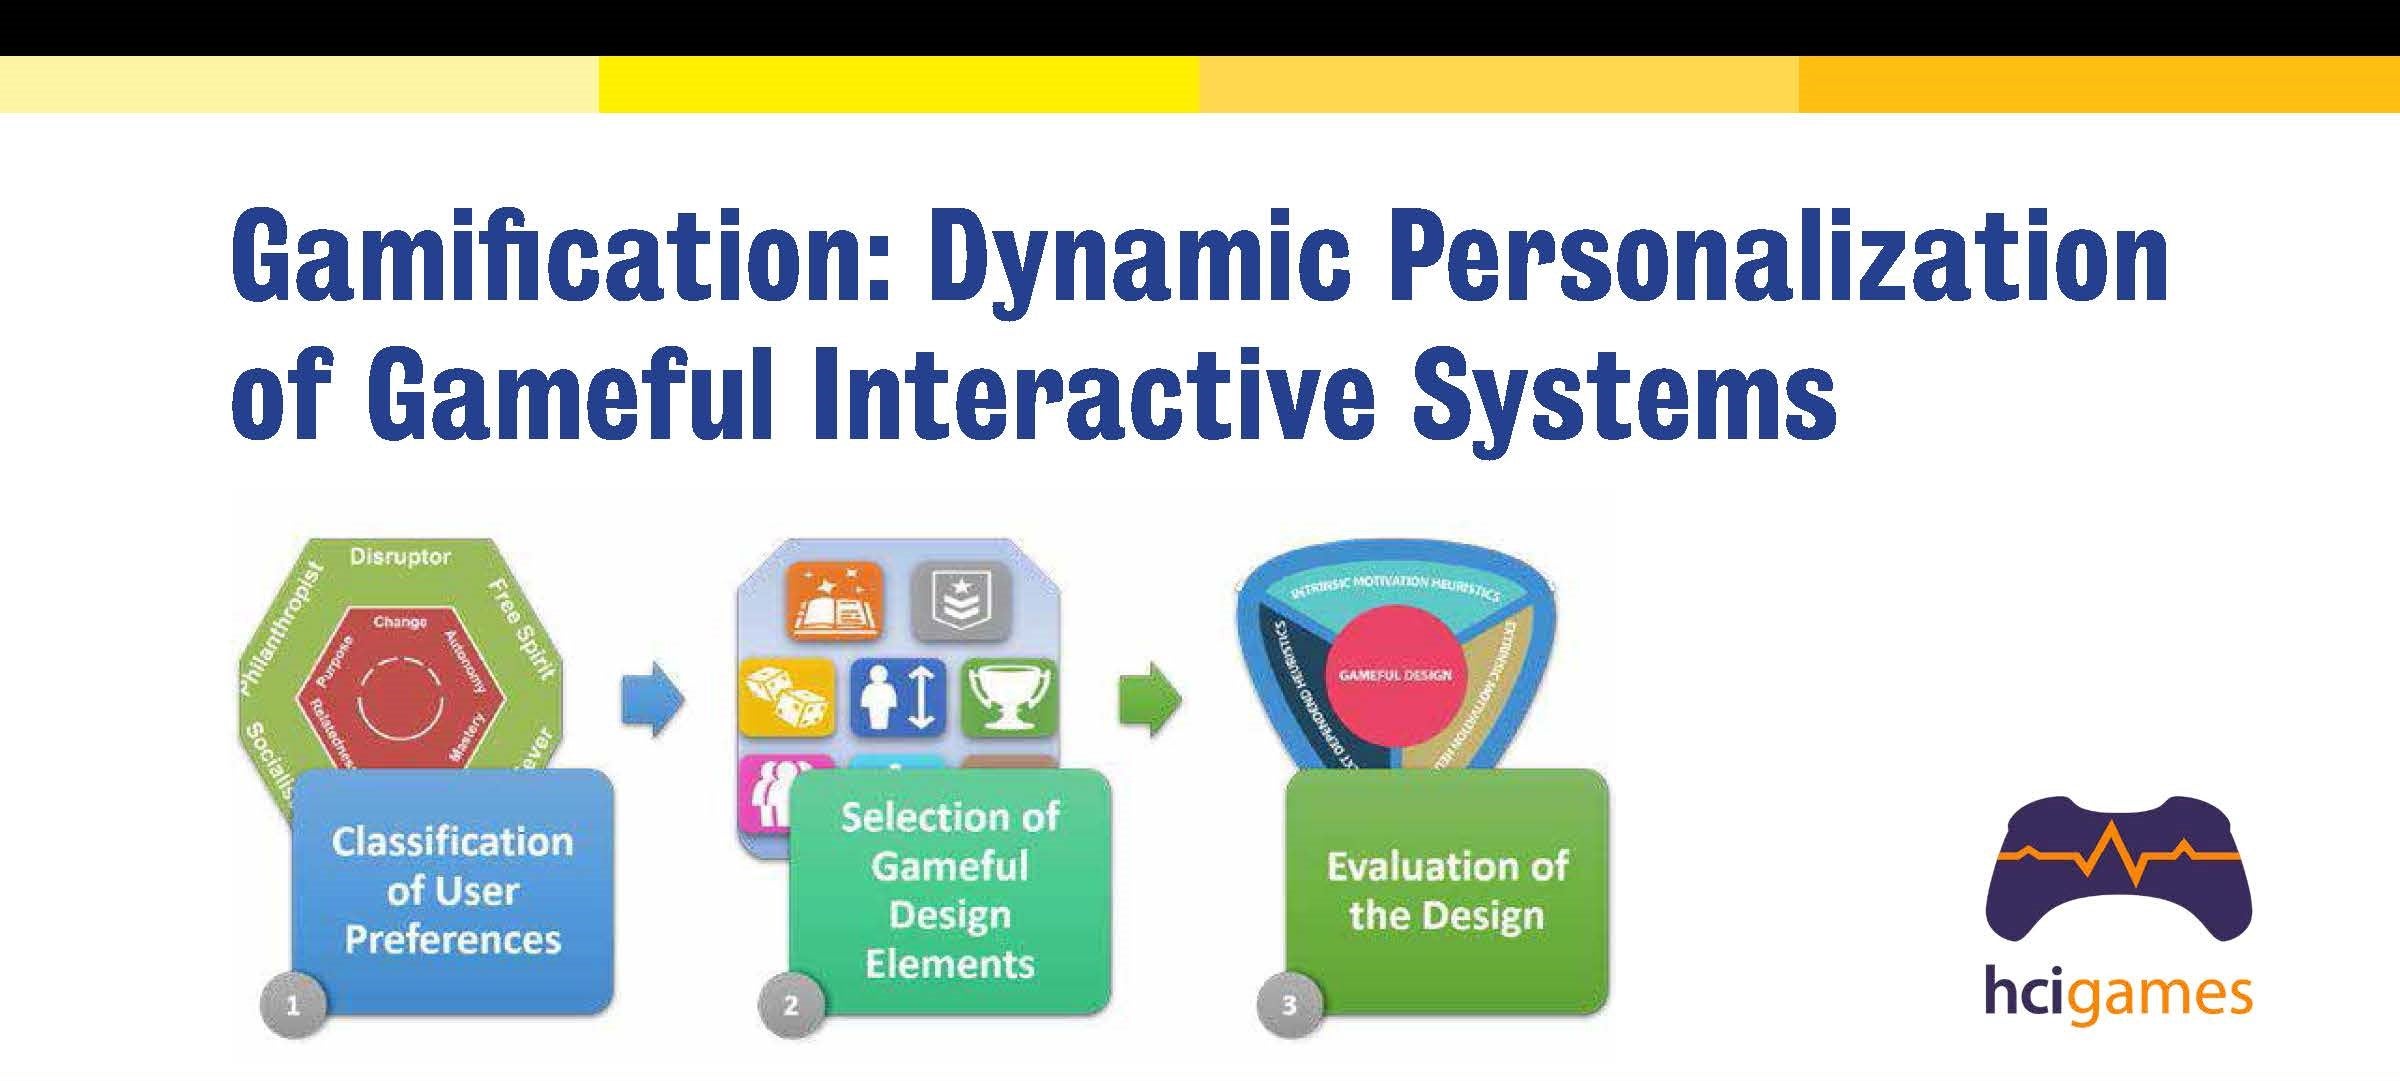 Gamification: Dynamic Personalization of Gameful Interactive Systems poster title with flow chart graphic and HCI games logo